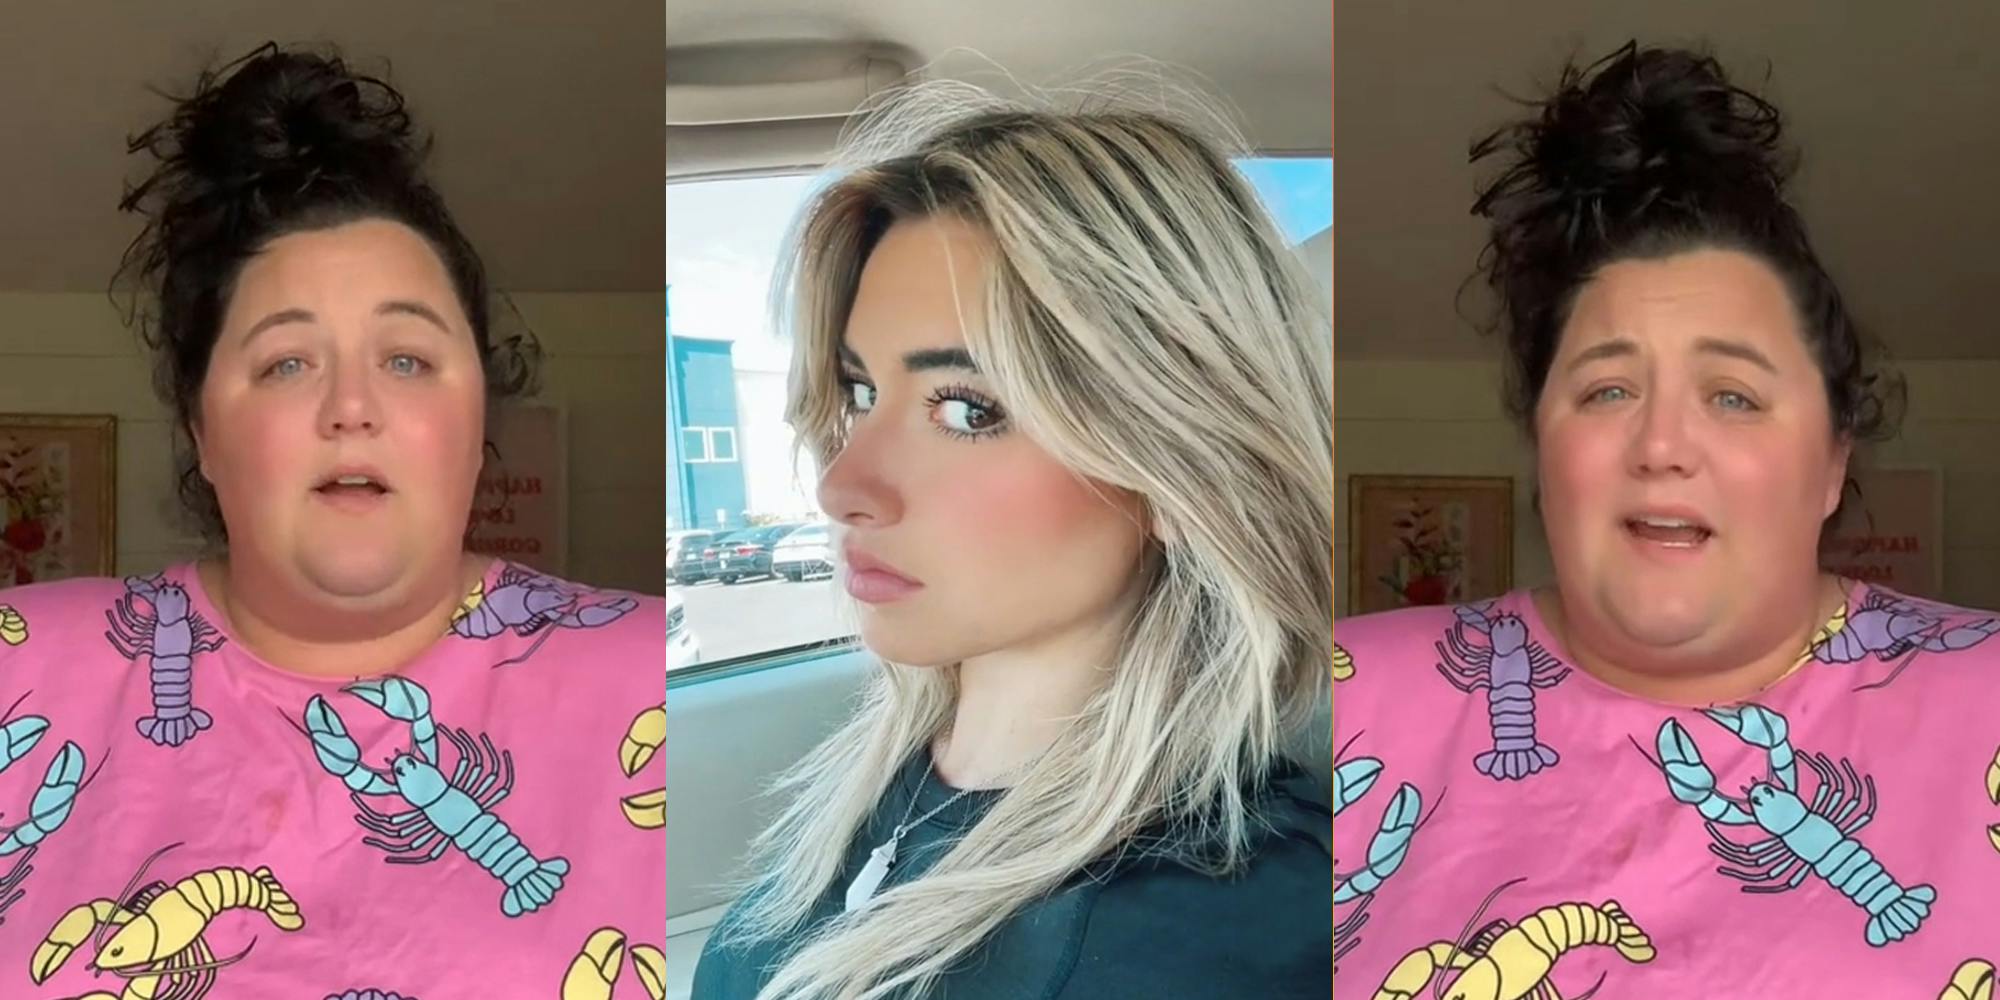 Viral TikTok sparks debate over doxxing after viewers harass the women in  it online, review-bomb alleged employer